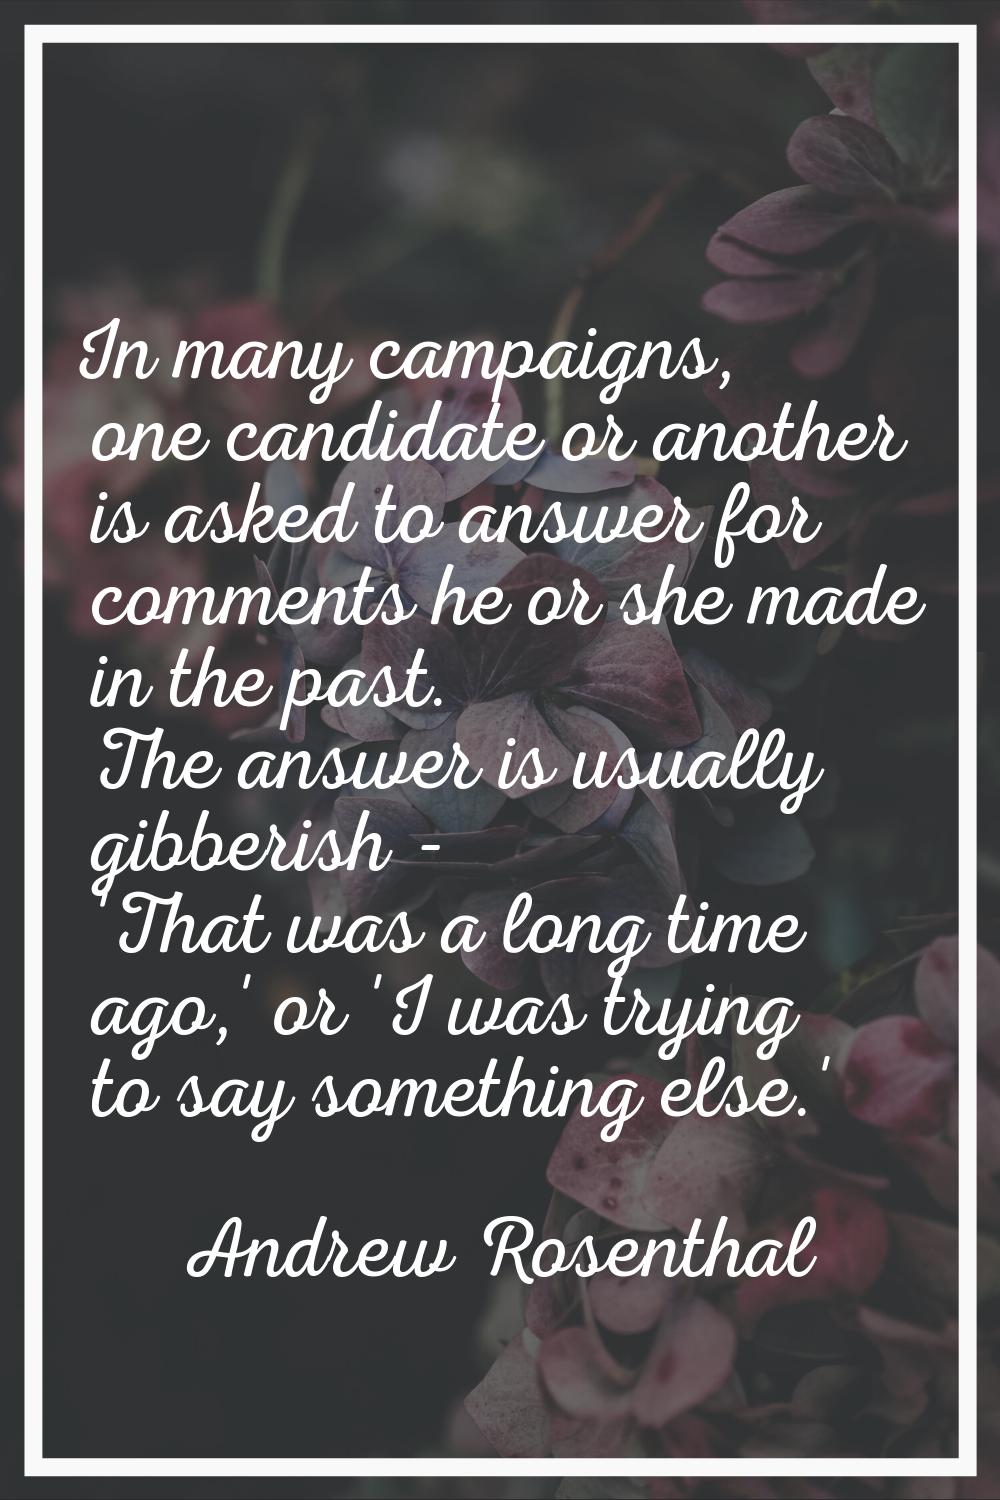 In many campaigns, one candidate or another is asked to answer for comments he or she made in the p